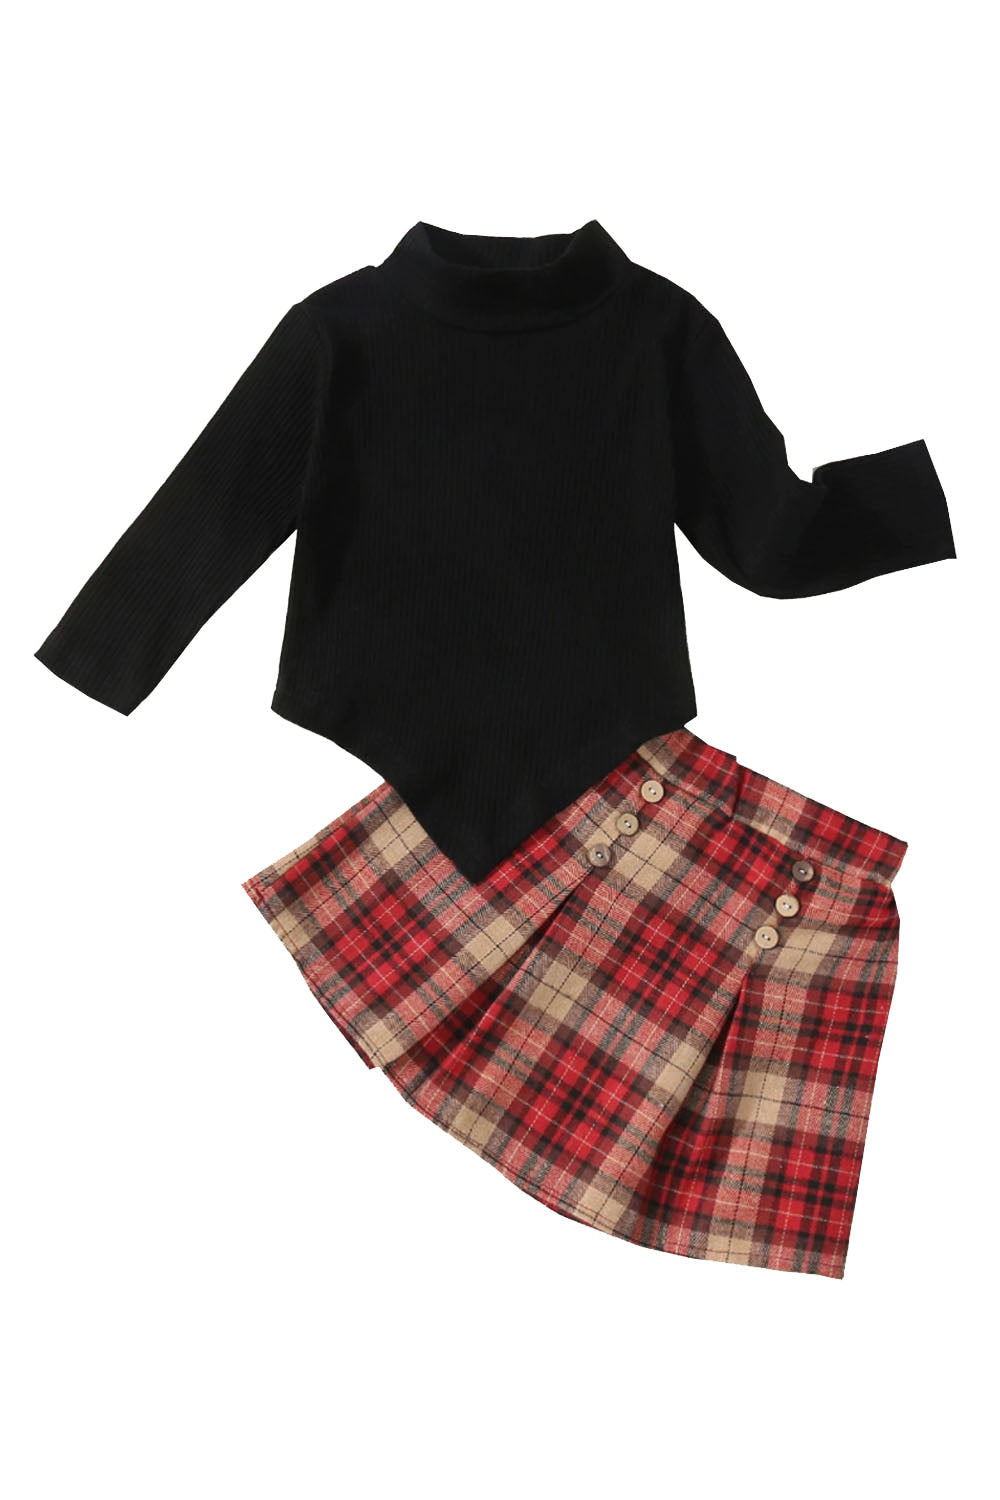 Sweet and Stylish: Little Girls' 2 Pc Plaid Skirt Set for a Picture-Perfect Look